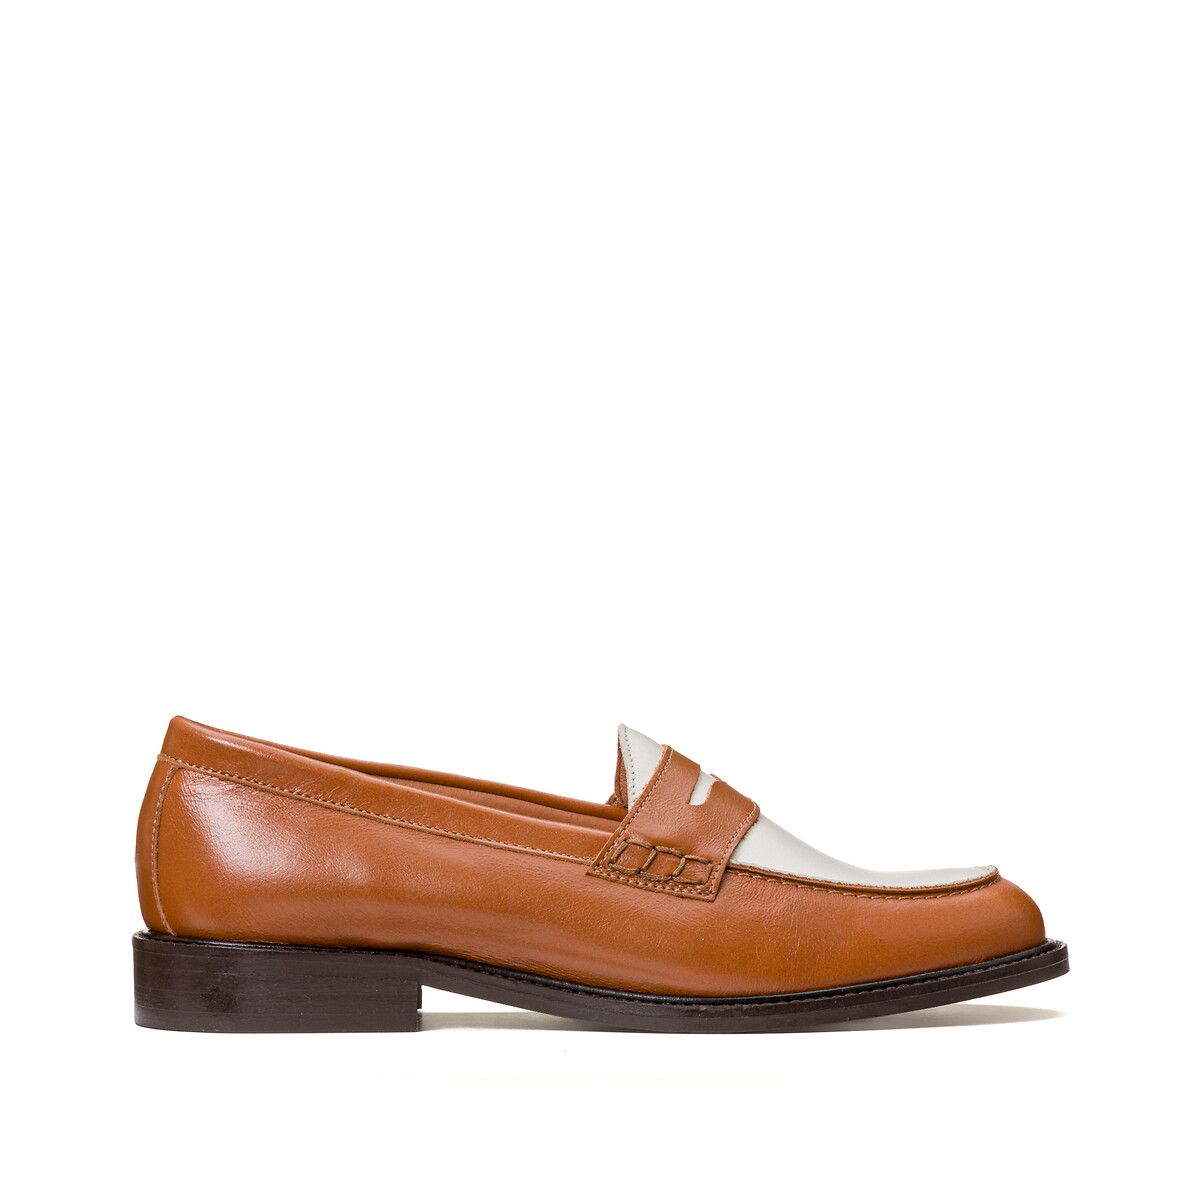 Two-Tone Leather Loafers | La Redoute (UK)